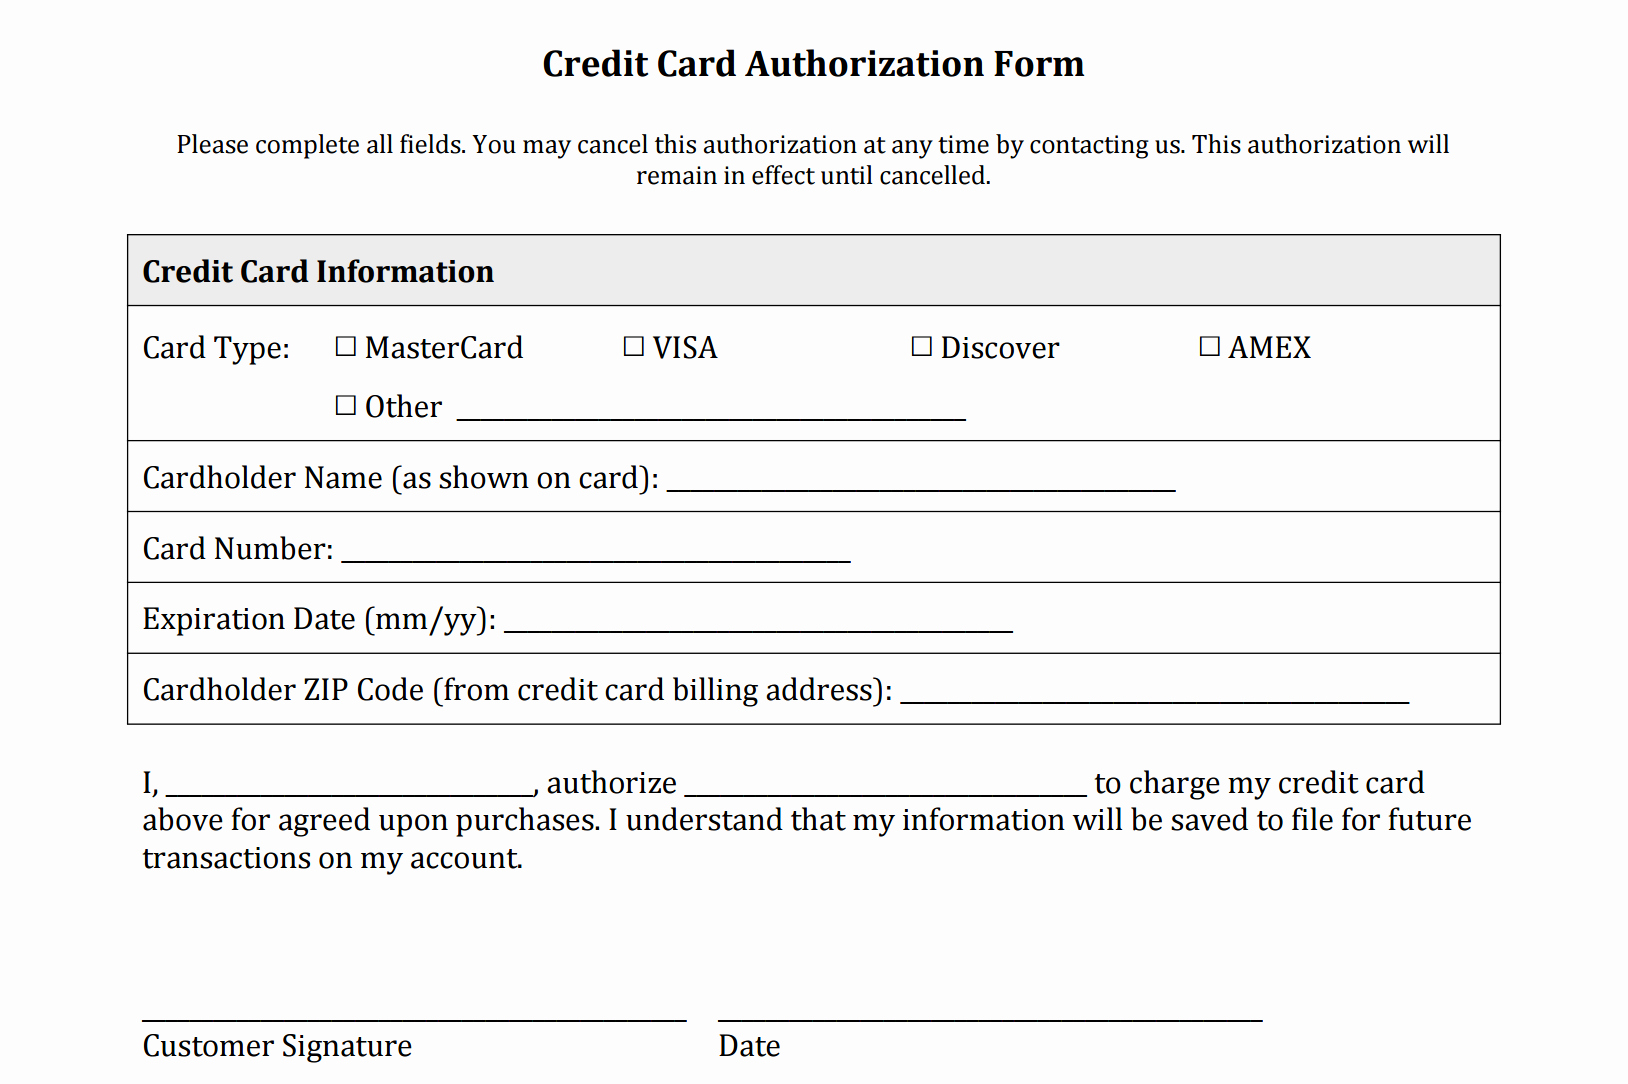 Payment Authorization form Template Awesome Credit Card Authorization form Templates [download]